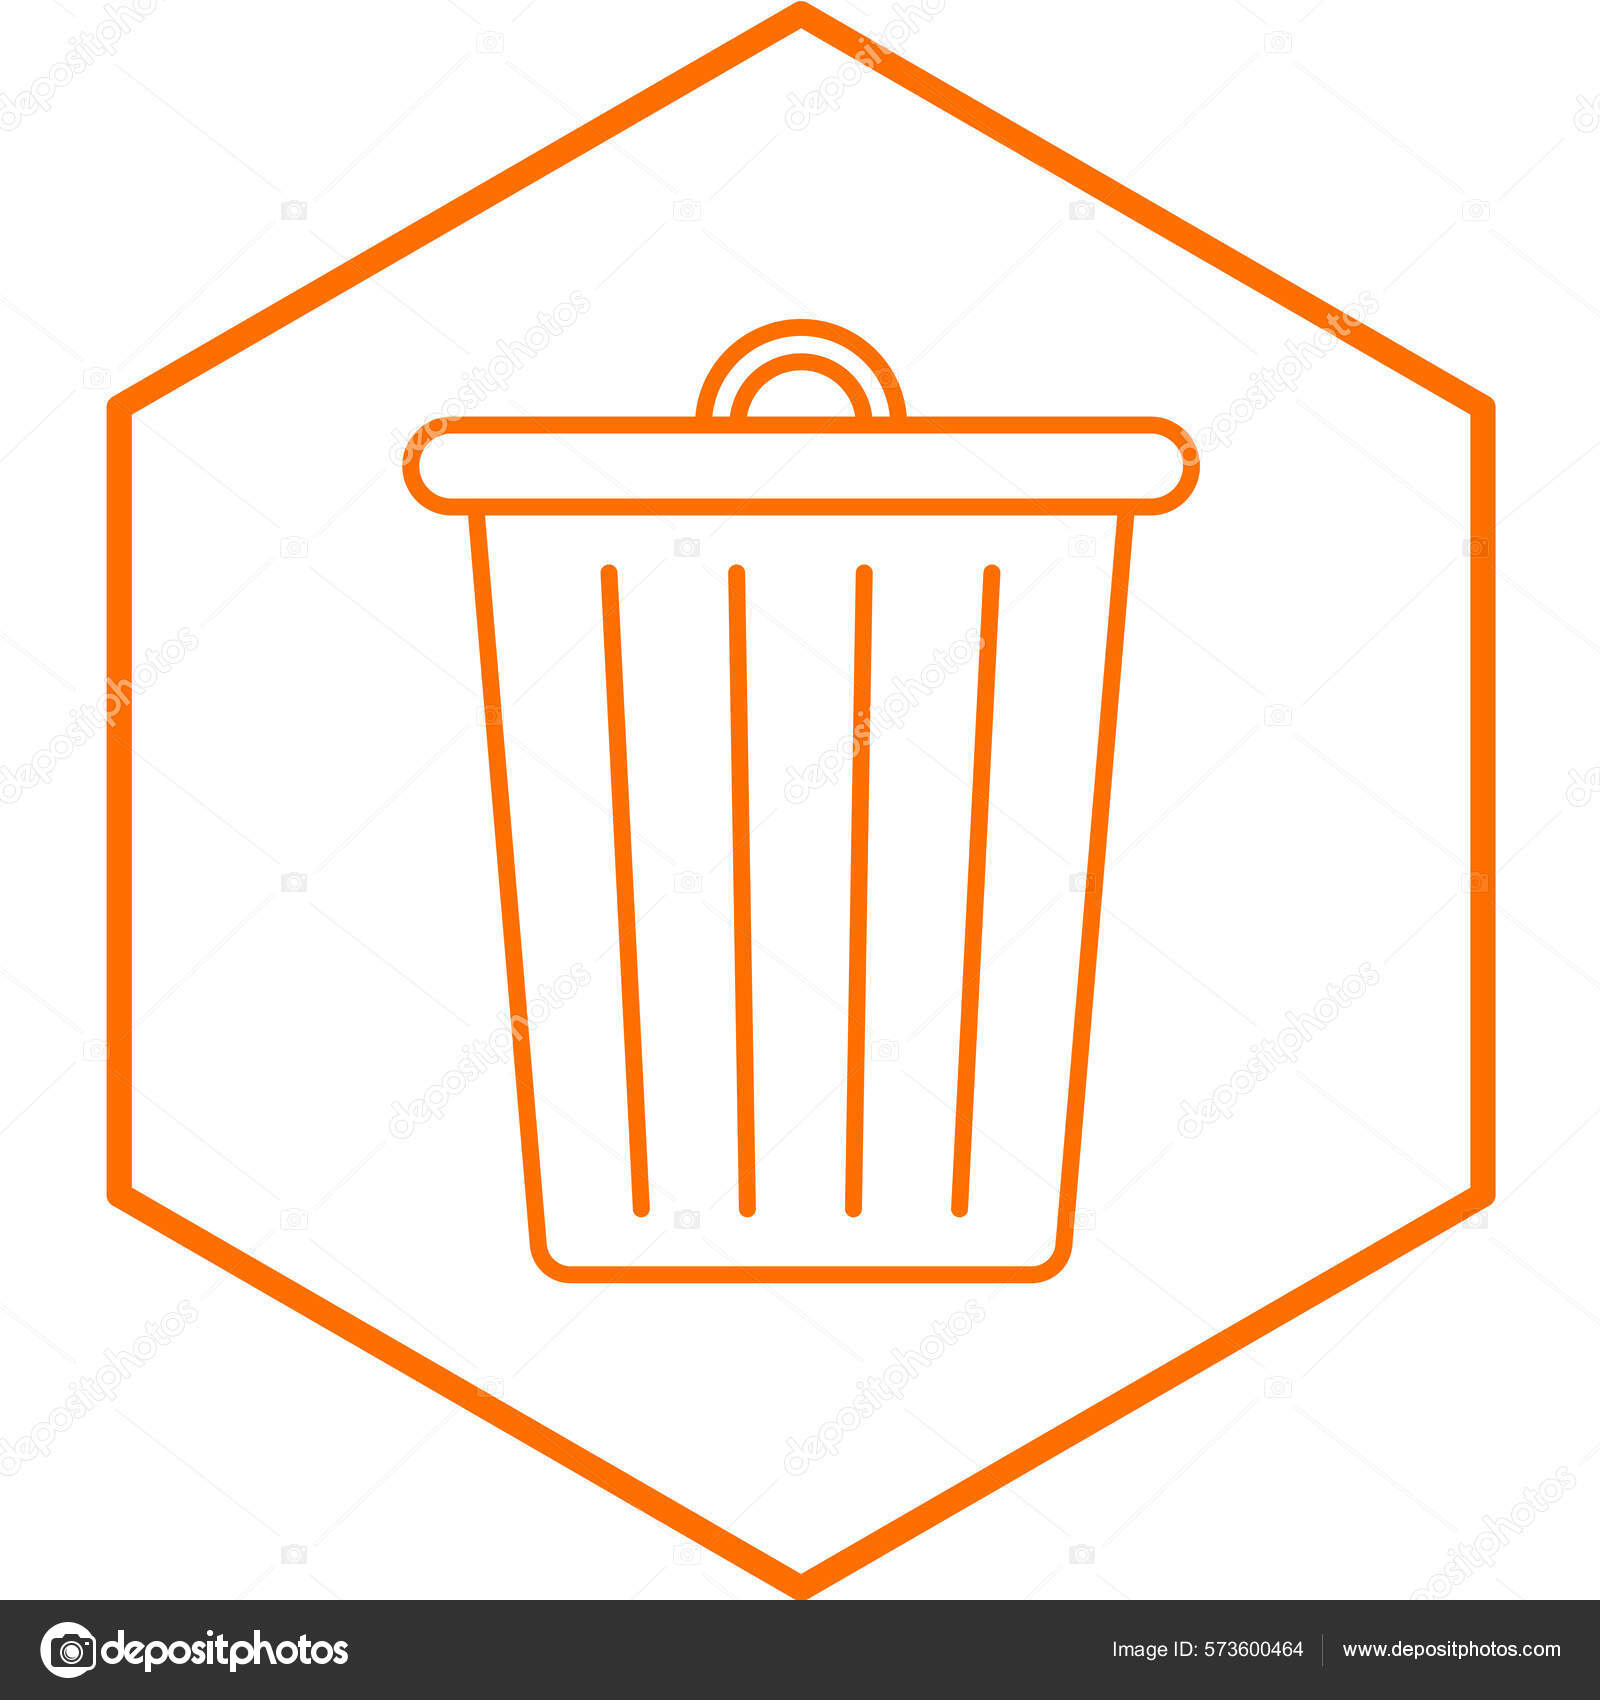 Isolated trash container on white background Vector Image